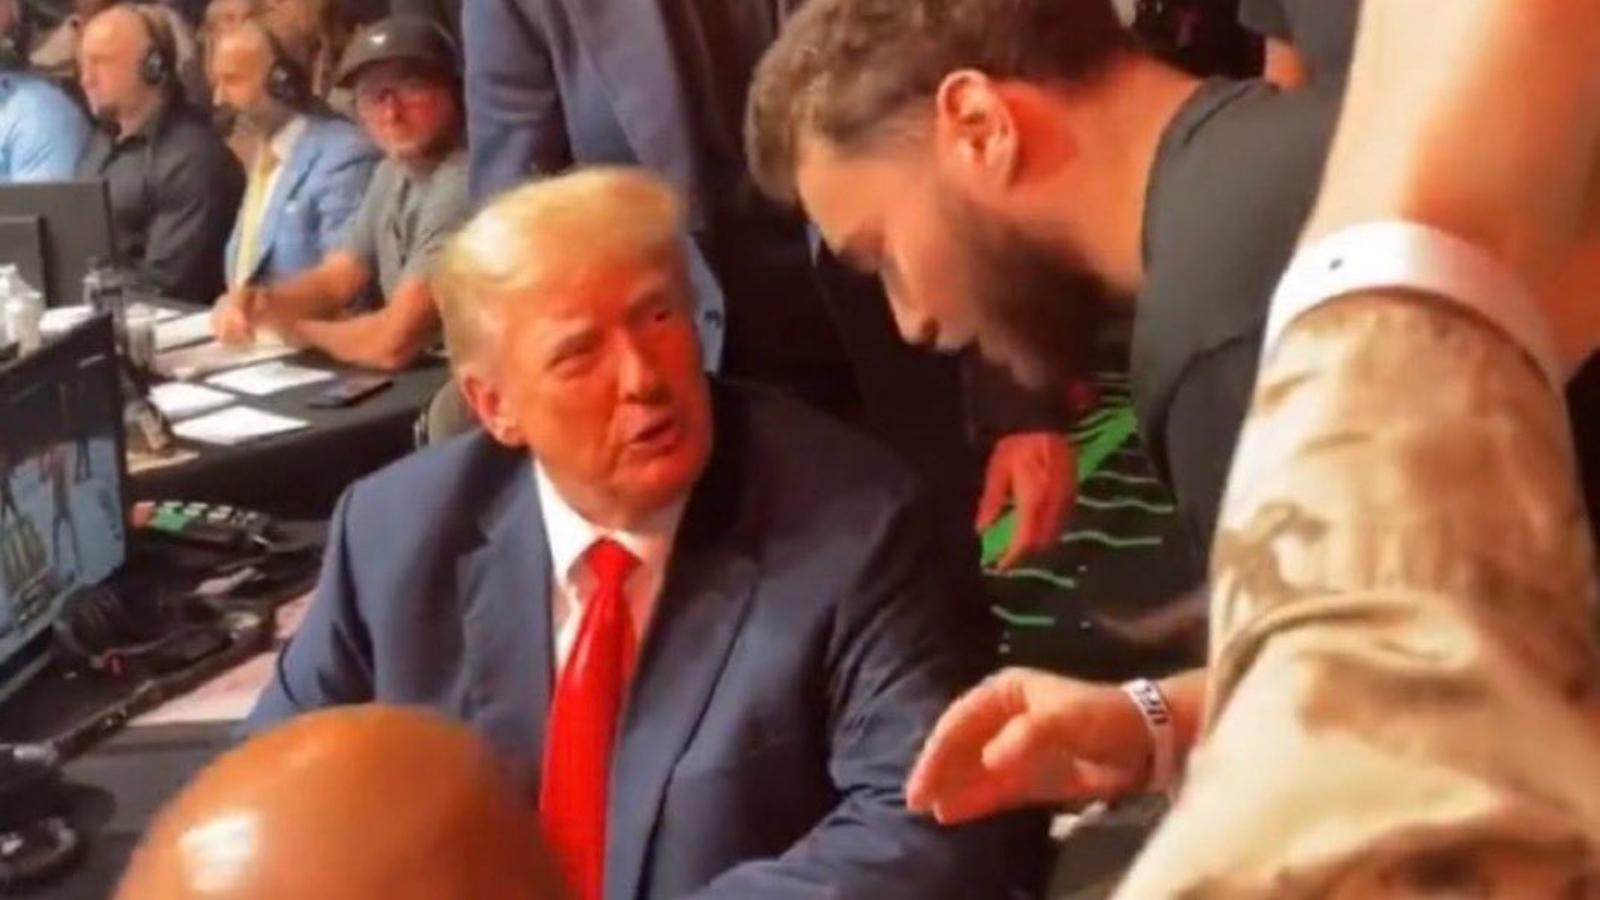 Adin Ross meets with Donald Trump at UFC